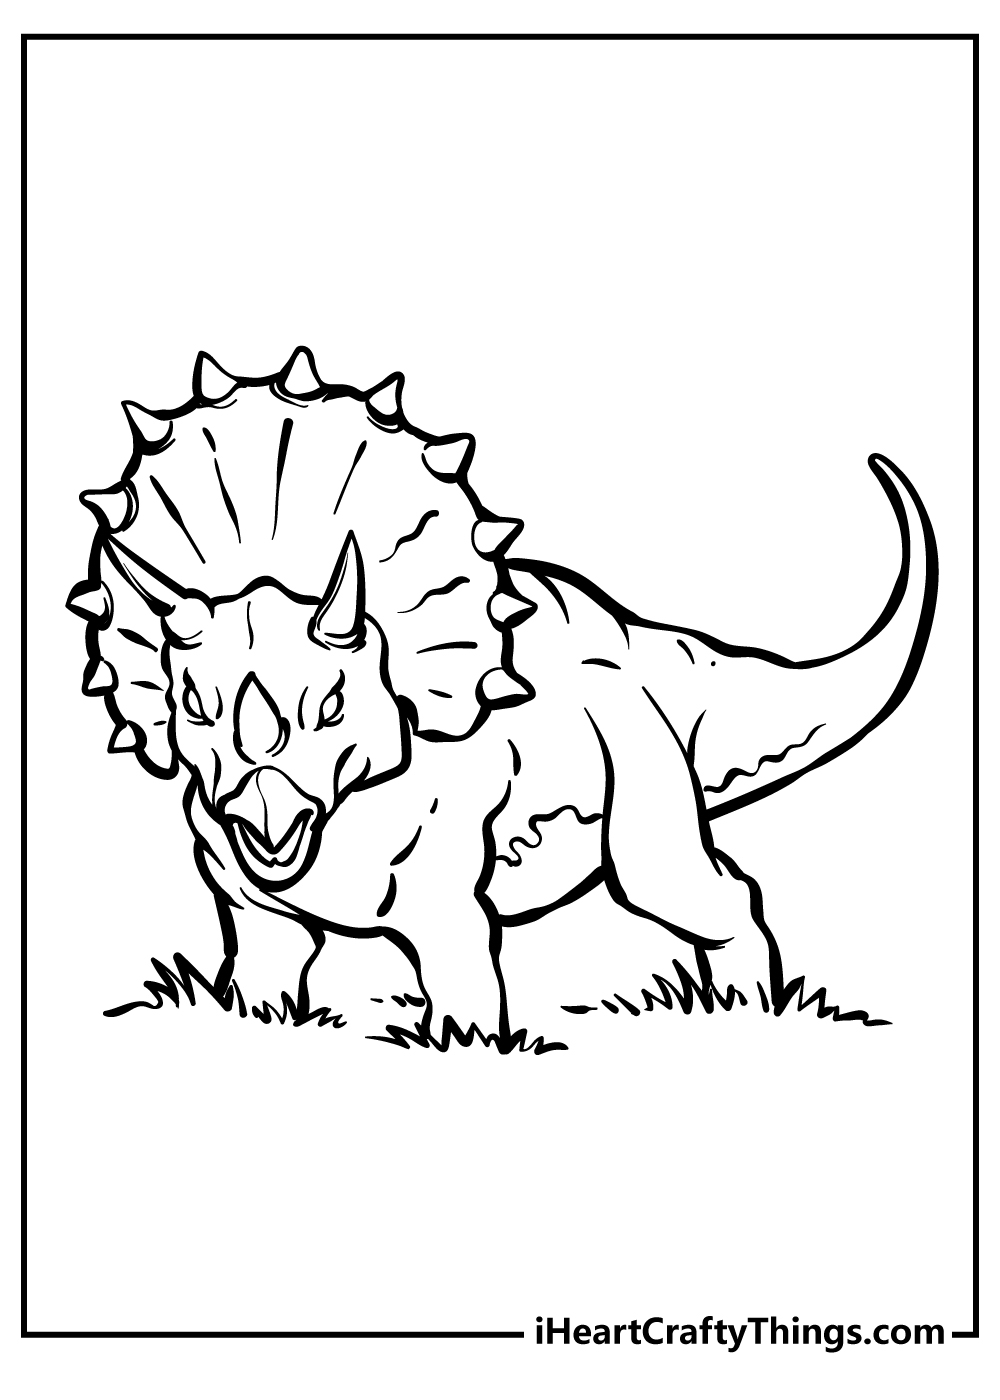 Jurassic World Coloring Pages for adults free printable